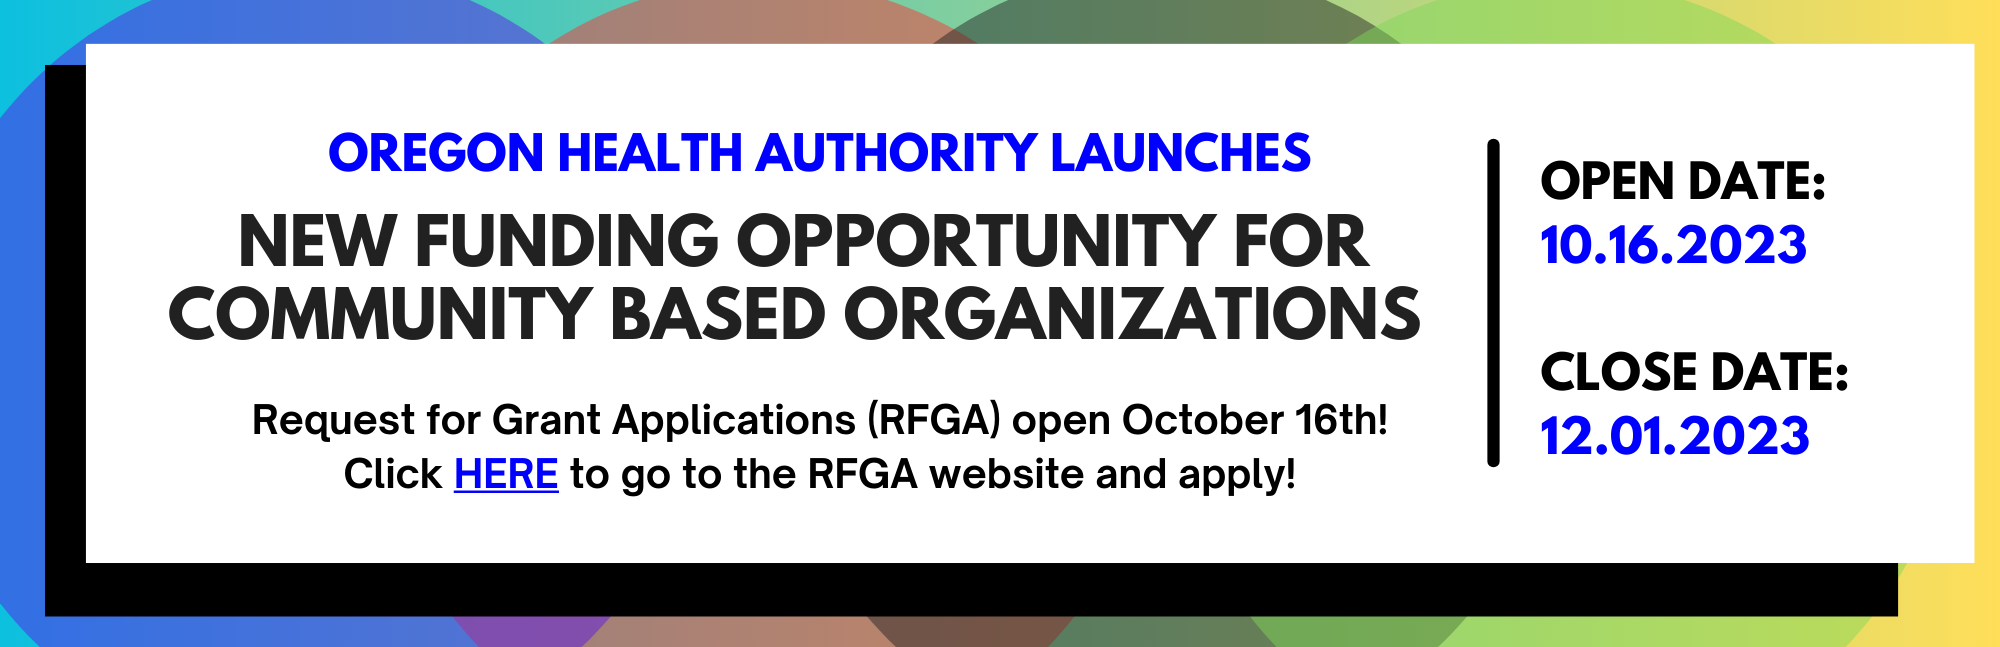 Oregon Health Authority Launches New funding opportunity for community based organizations. Open date: 10.16.2023 Close date: 11.30.2023. Request for Grant Applications open October 16. Click here to join a RFGA Informational webinar